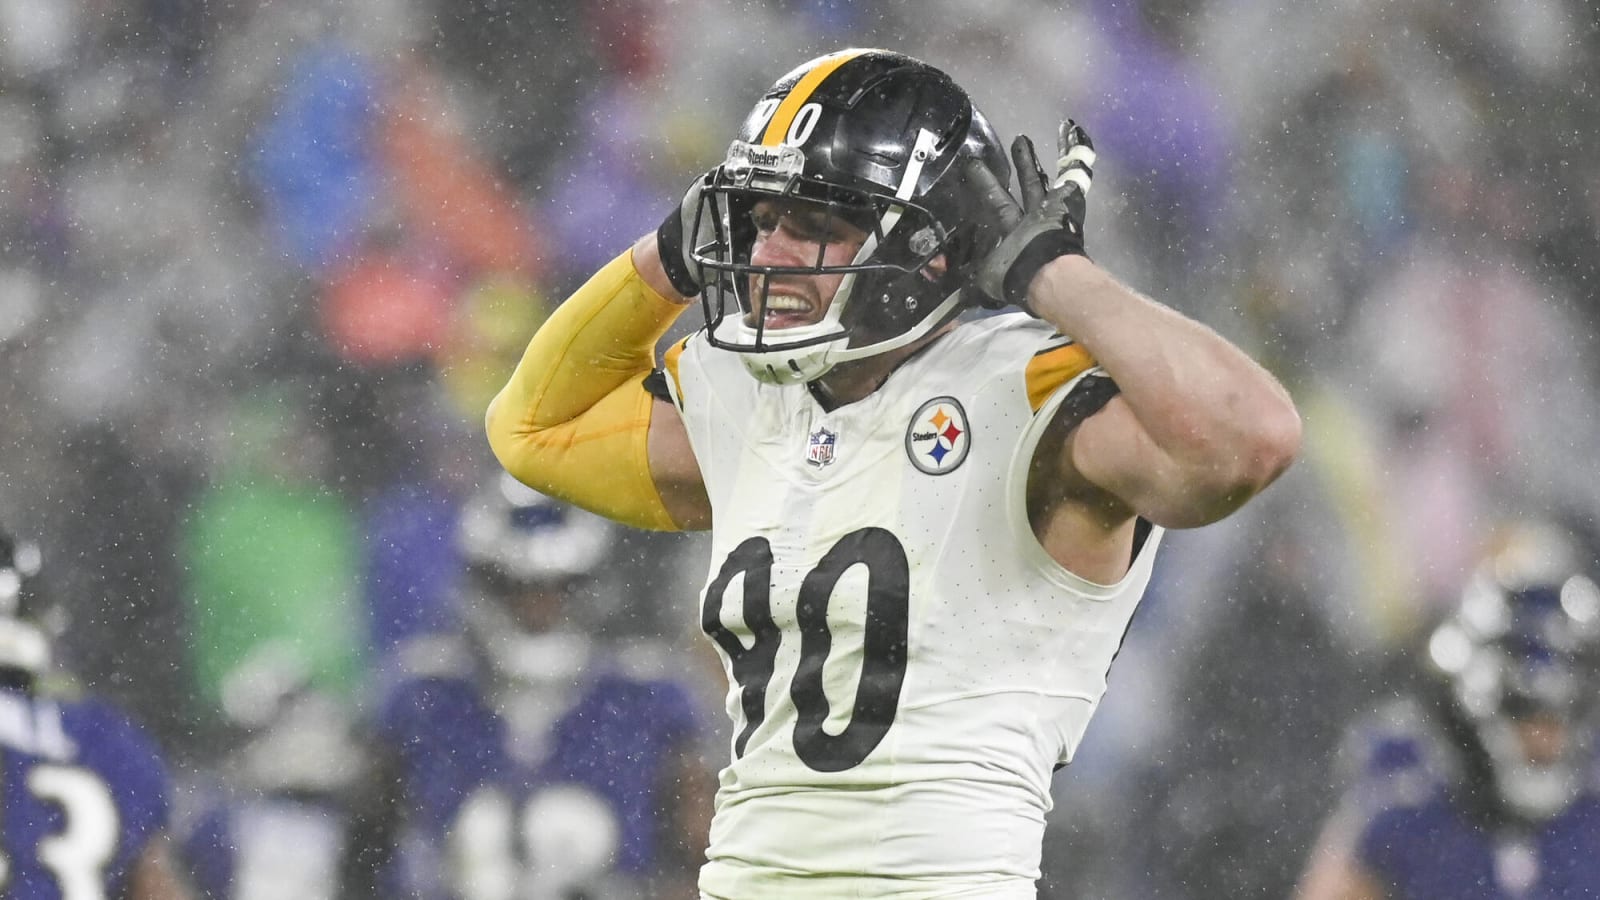 Steelers’ TJ Watt Gives Simple Response When Asked About Lions&#39; Sam LaPorta Playing Through The Same Injury He Didn’t